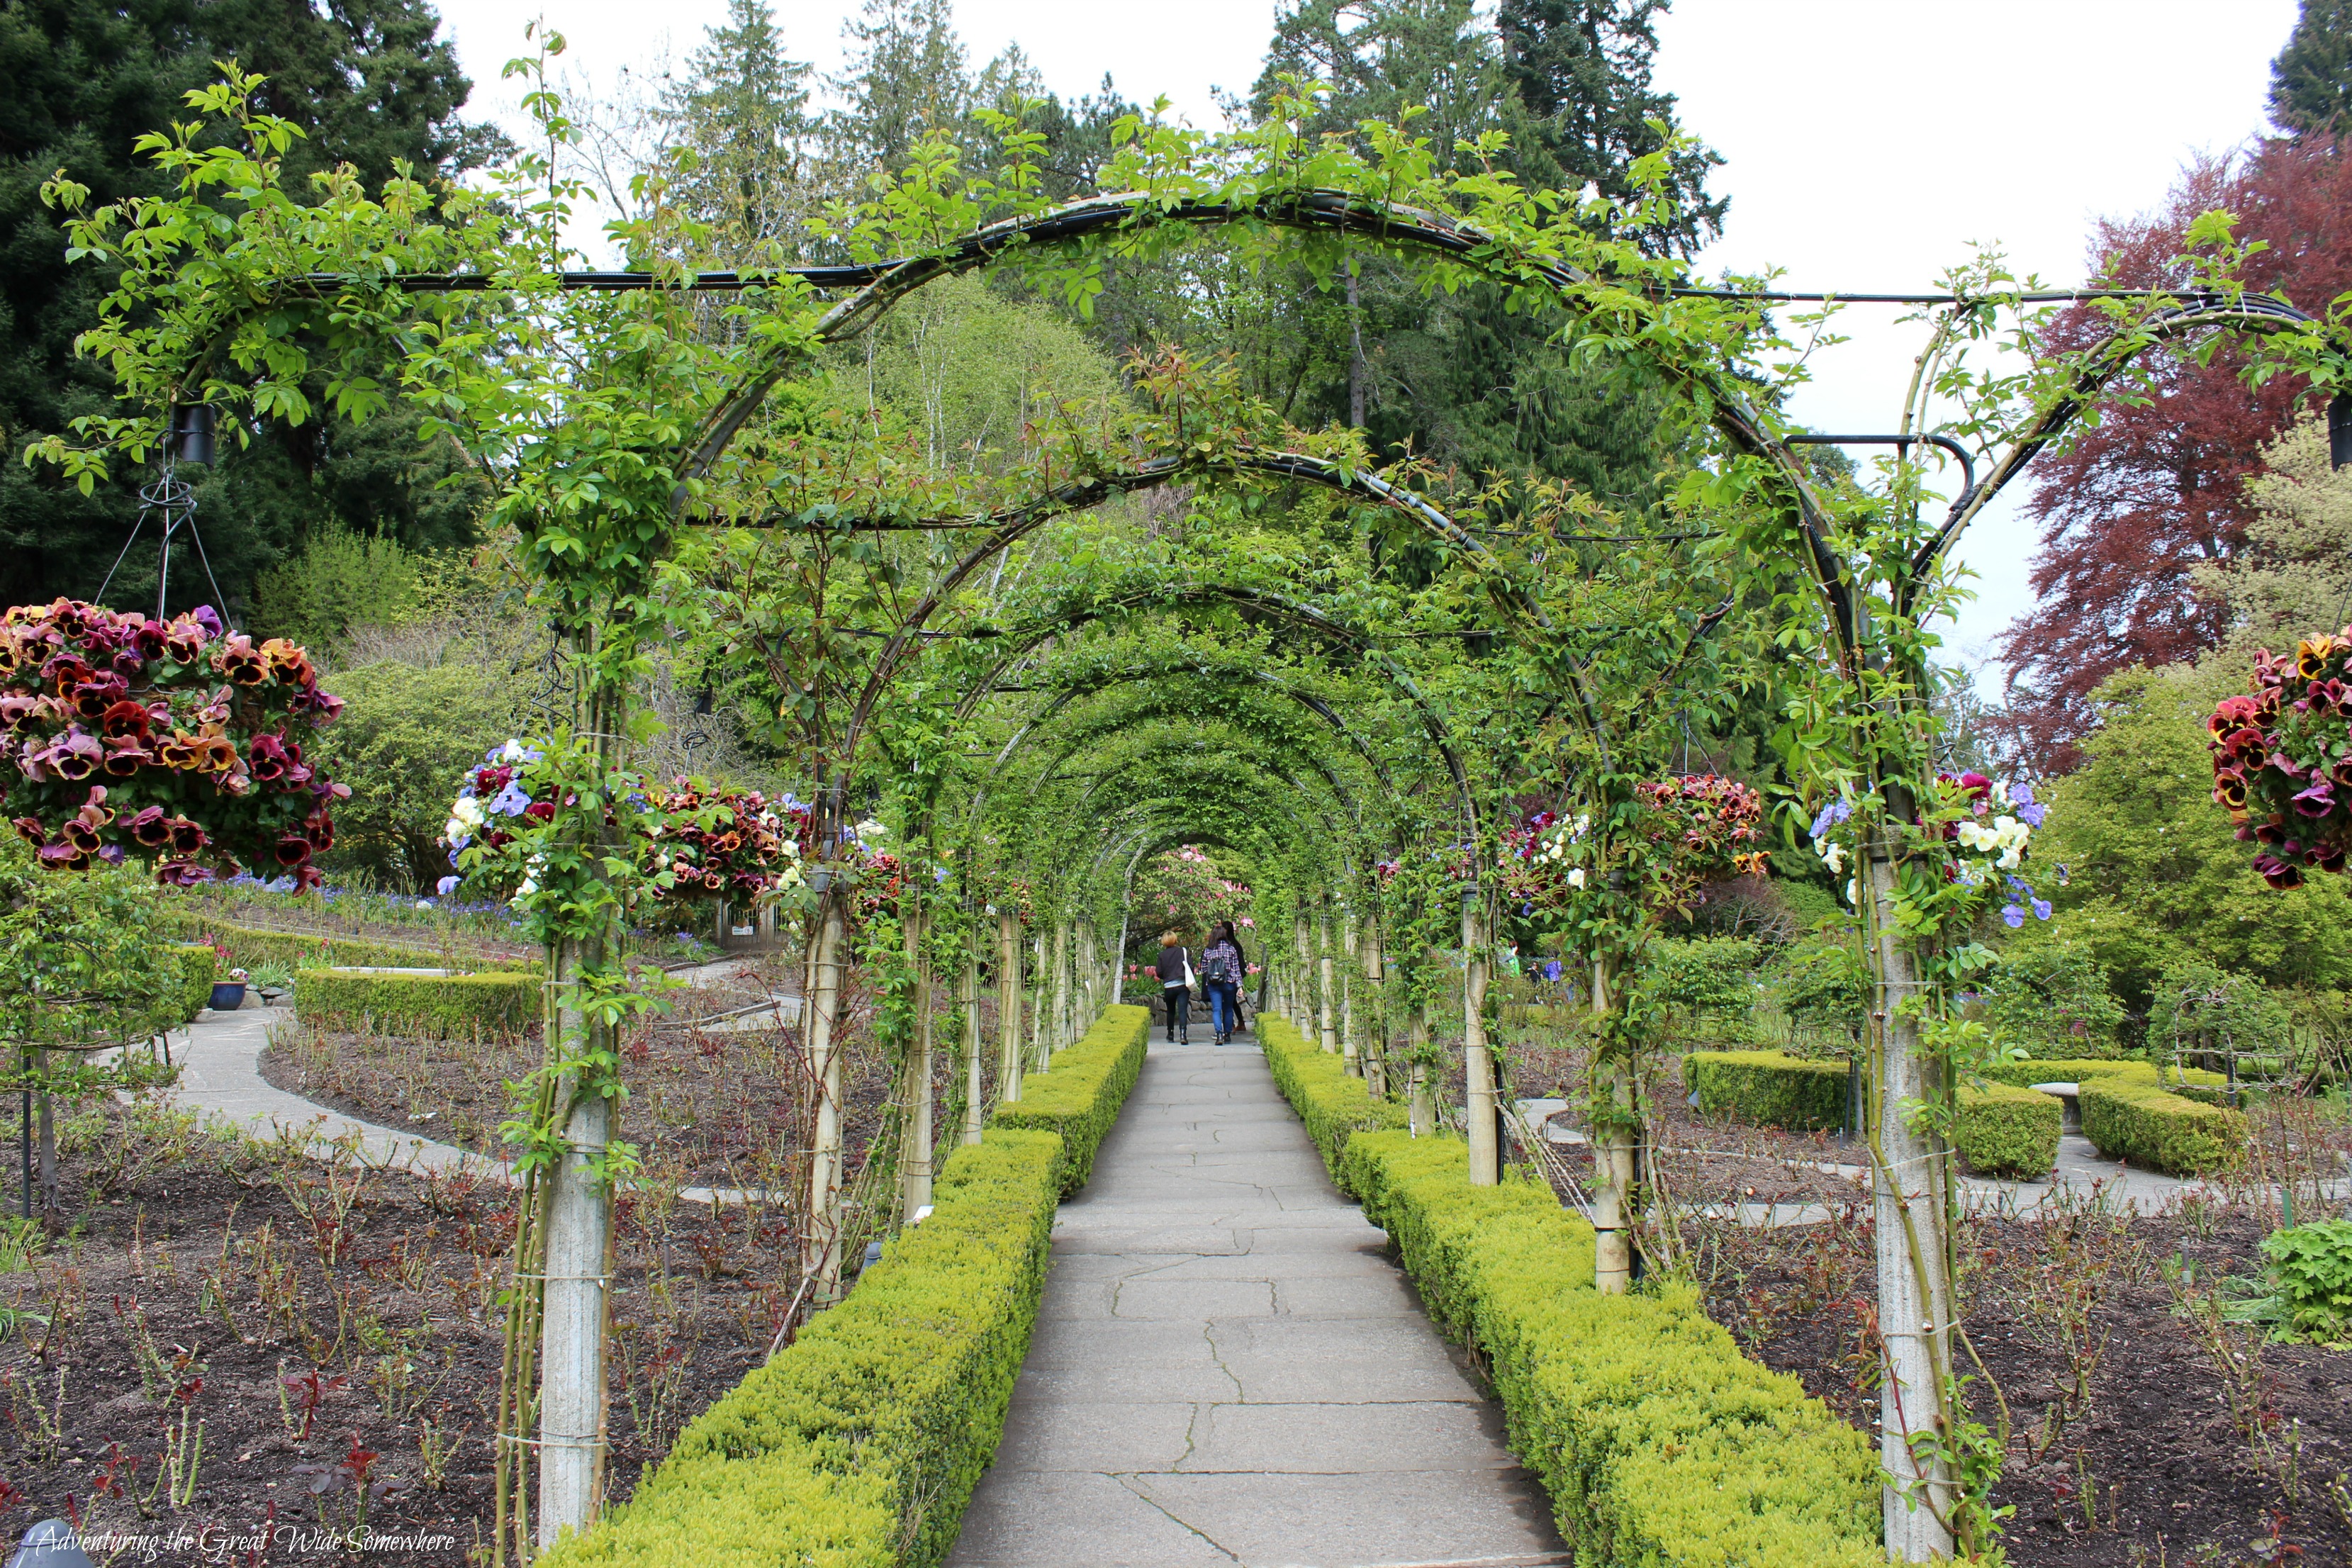 A Leafy Arch at the Butchart Gardens in British Columbia